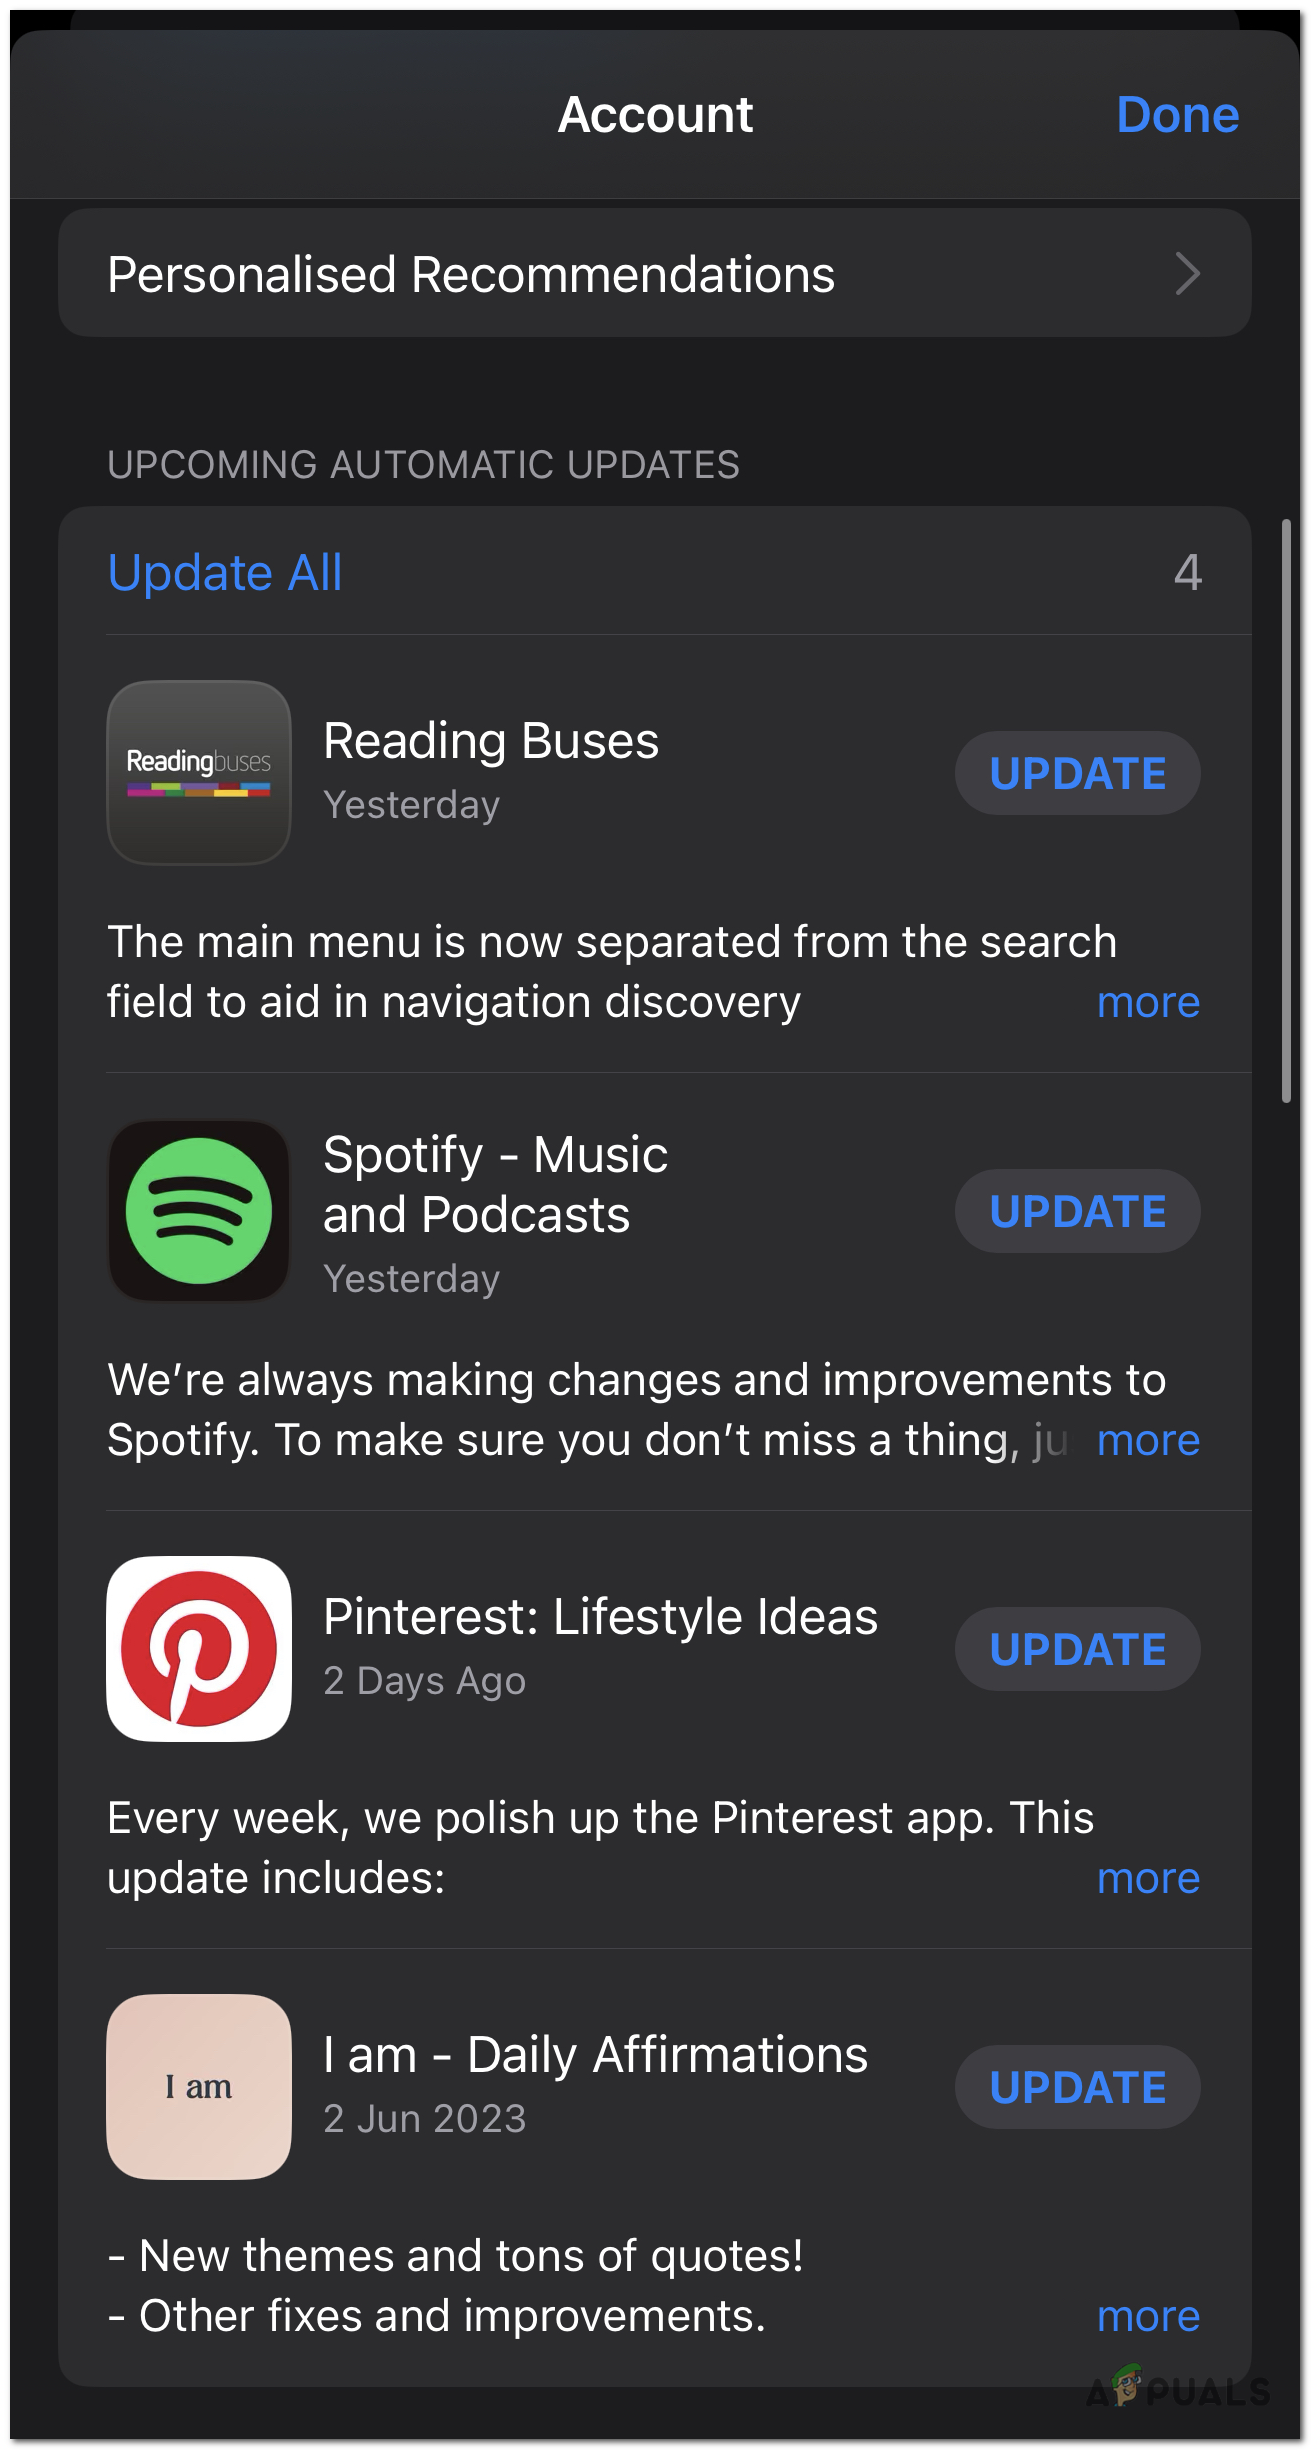 Scroll down and find Discord in the list of installed apps. If an update is available, you will see an "Update" button next to it.